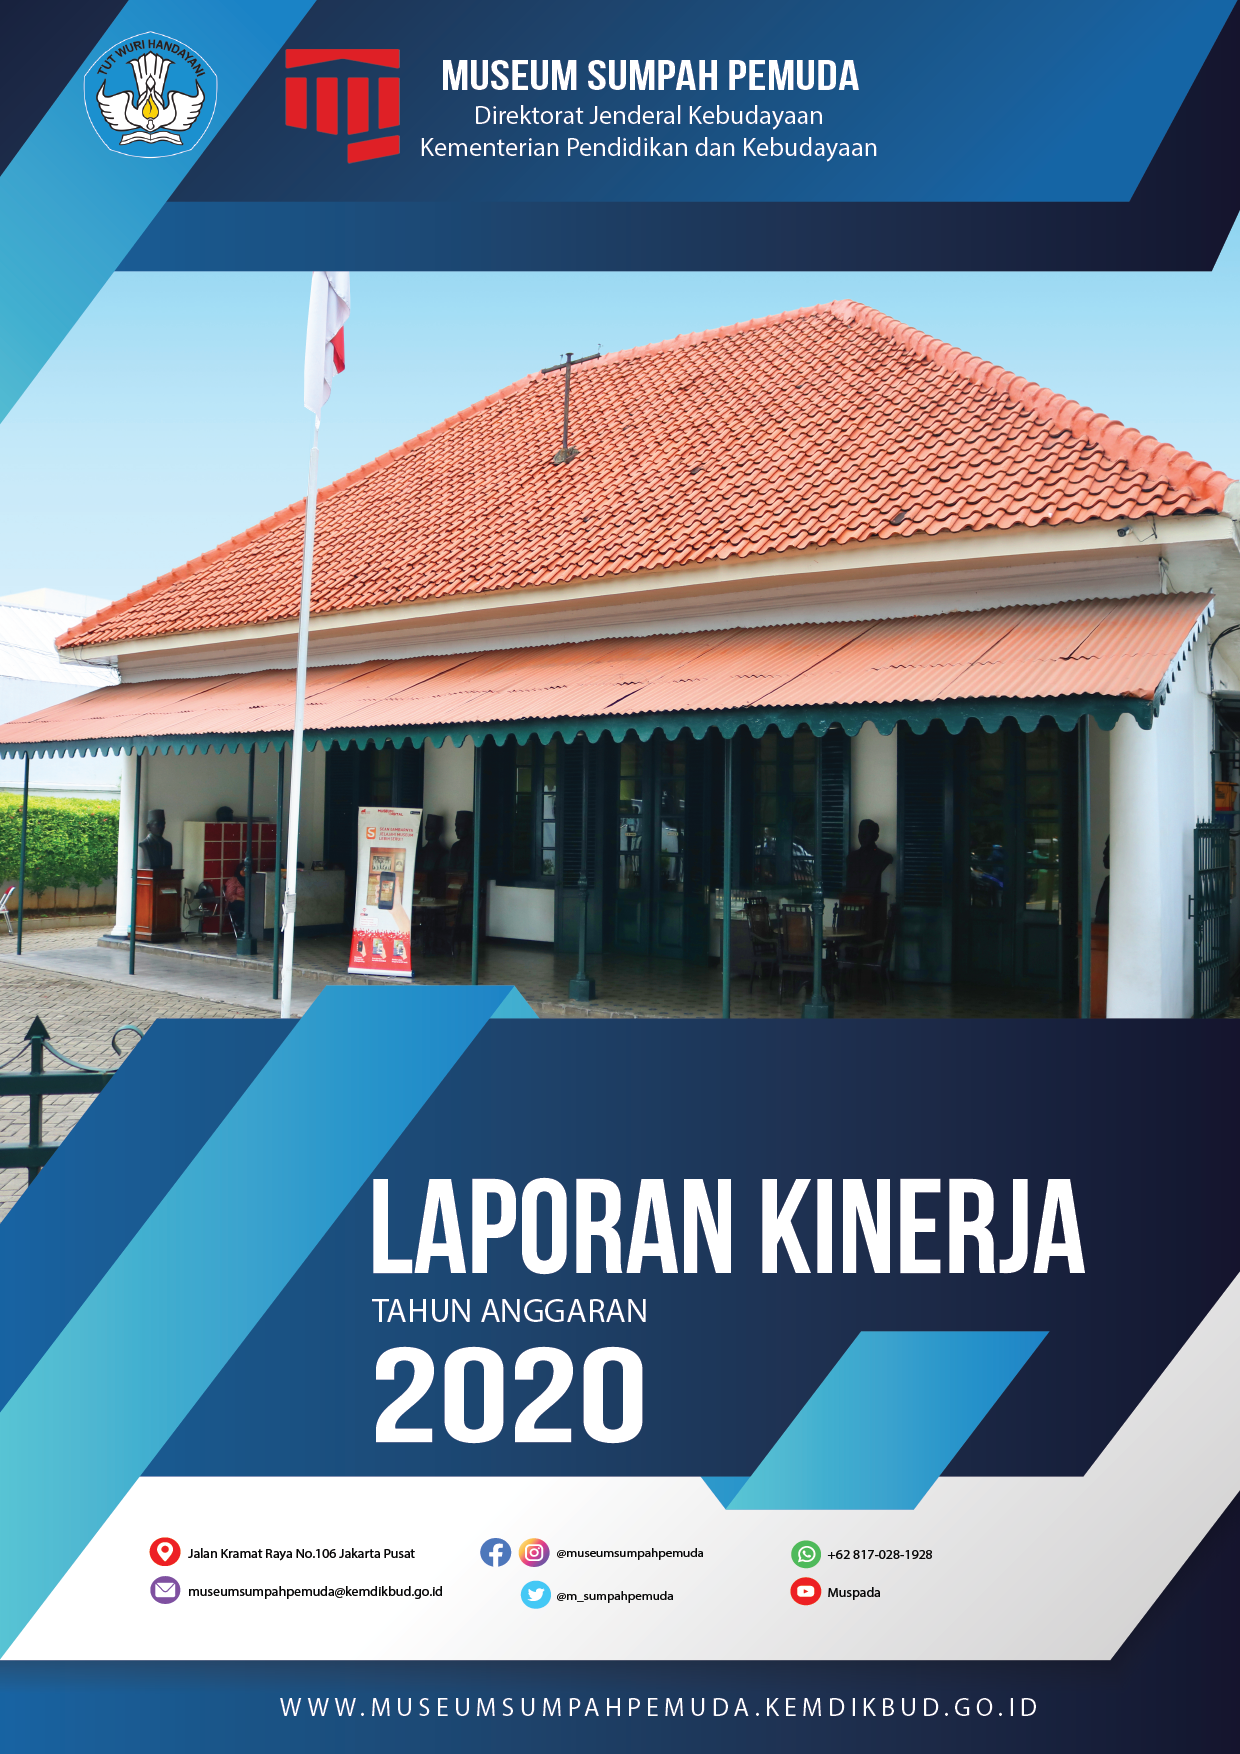 You are currently viewing LAKIP 2020 Museum Sumpah Pemuda